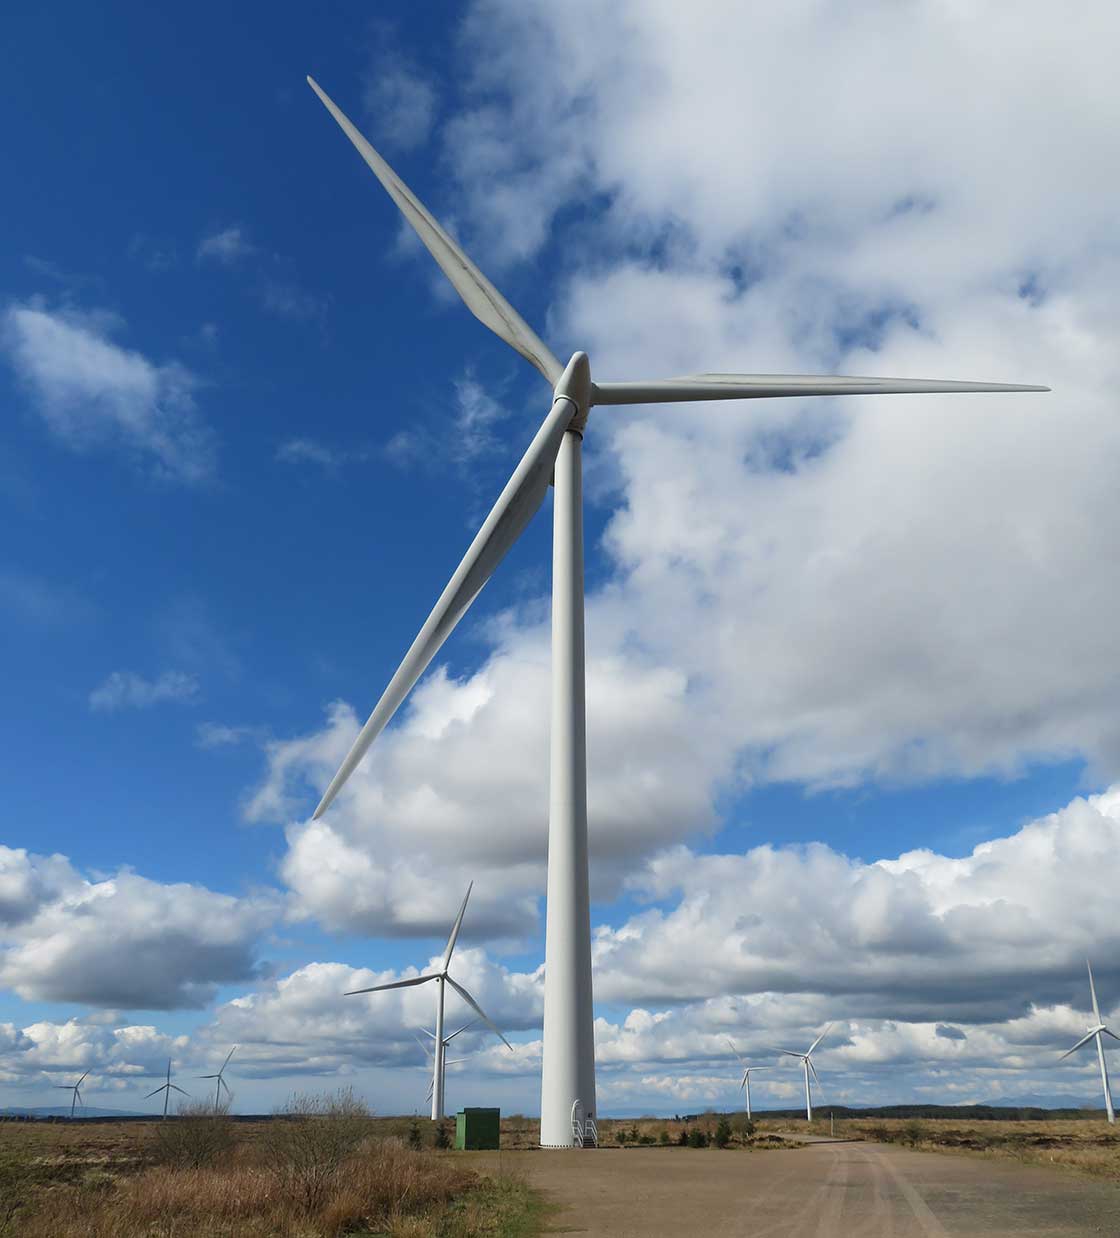 A wind turbine at Whitelees Wind Farm, the UK’s largest onshore wind farm, which is located near Glasgow